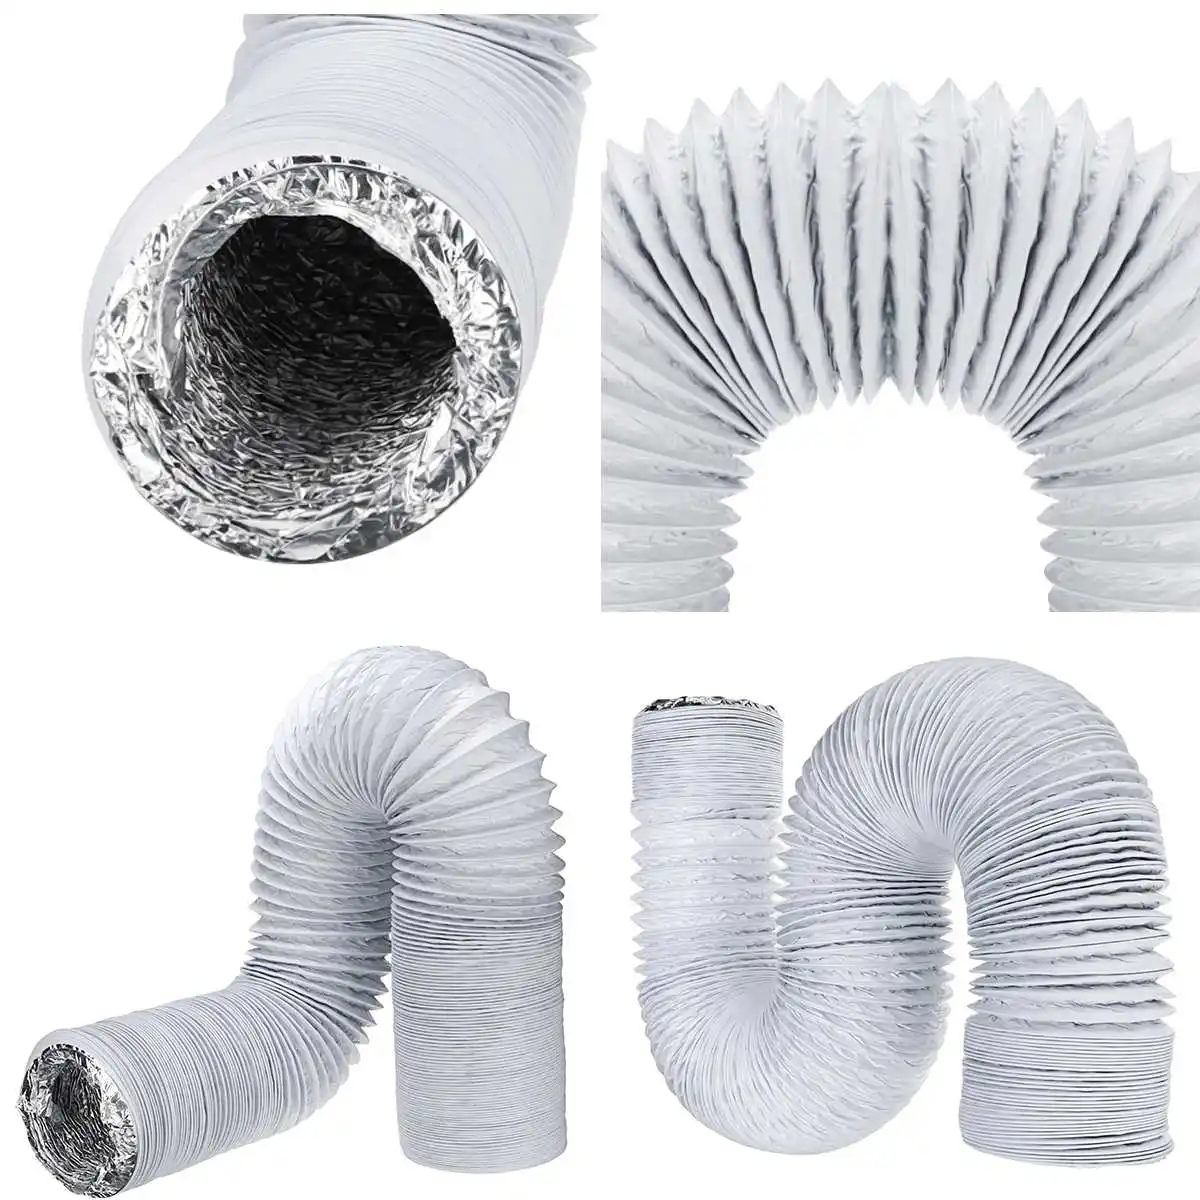 150mm 6 Inch Ventilator Pipe Pvc Aluminum Tube Air Ventilation Pipe Hose  Flexible Air Conditioner Exhaust Duct Air System Vent - Vents - AliExpress